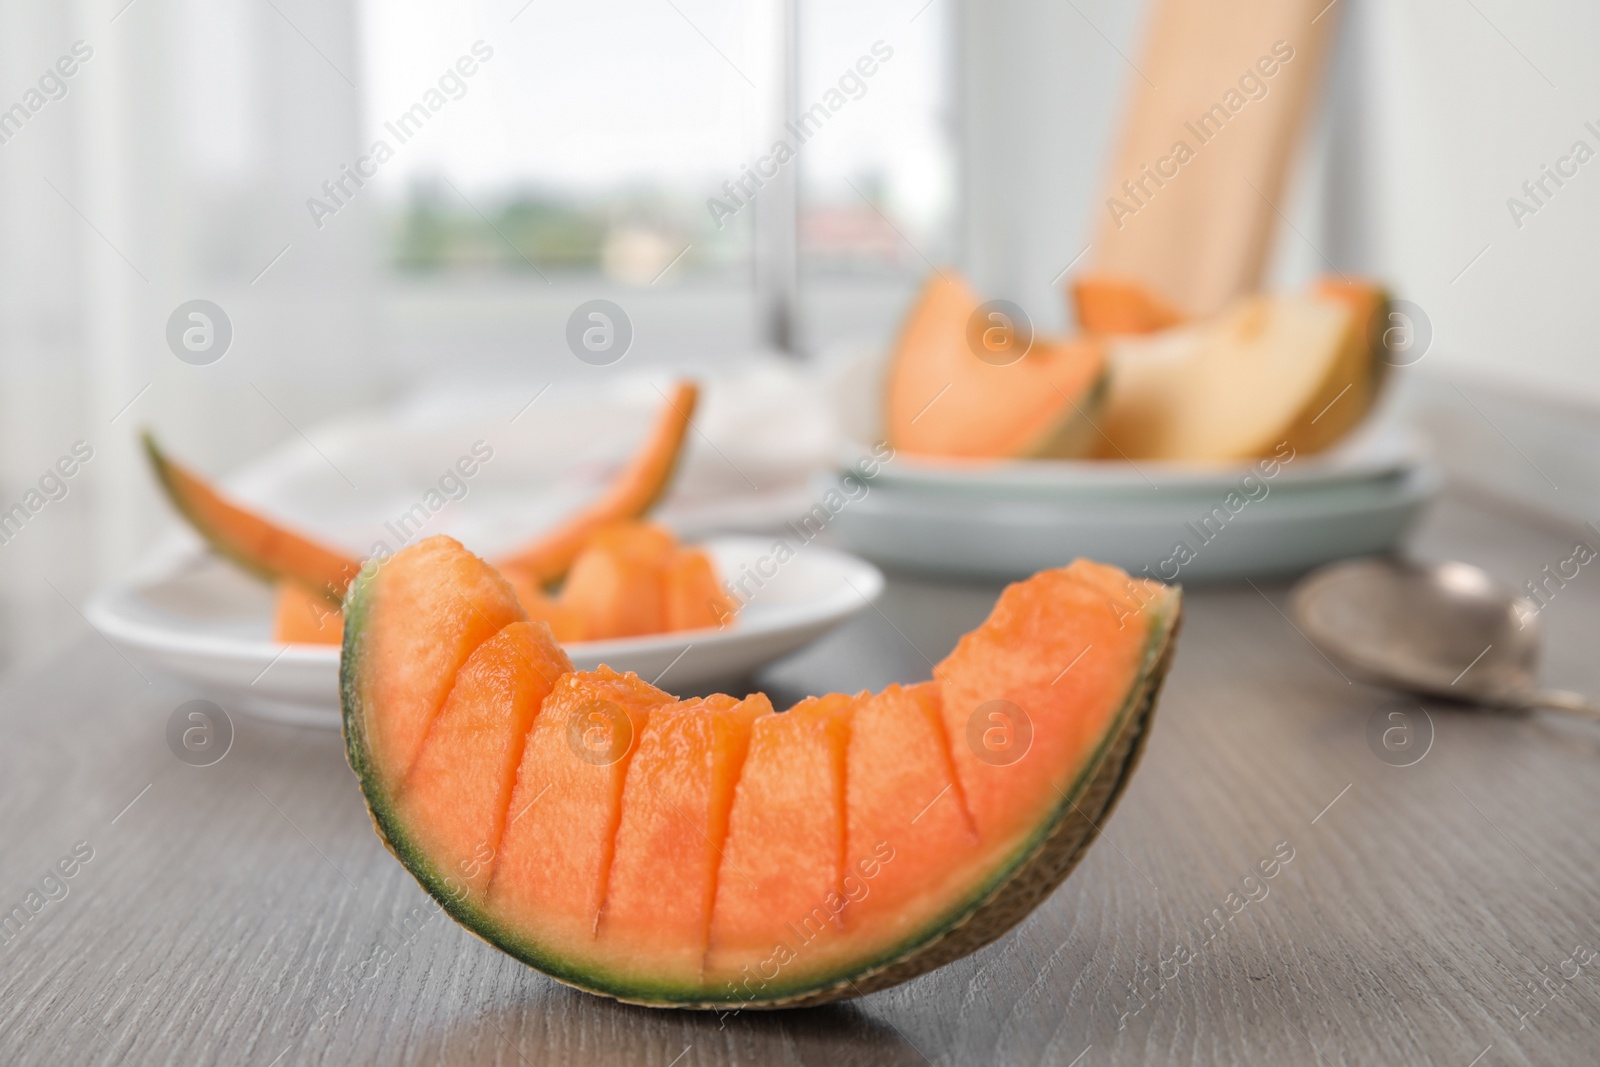 Photo of Slice of ripe cantaloupe melon on wooden table